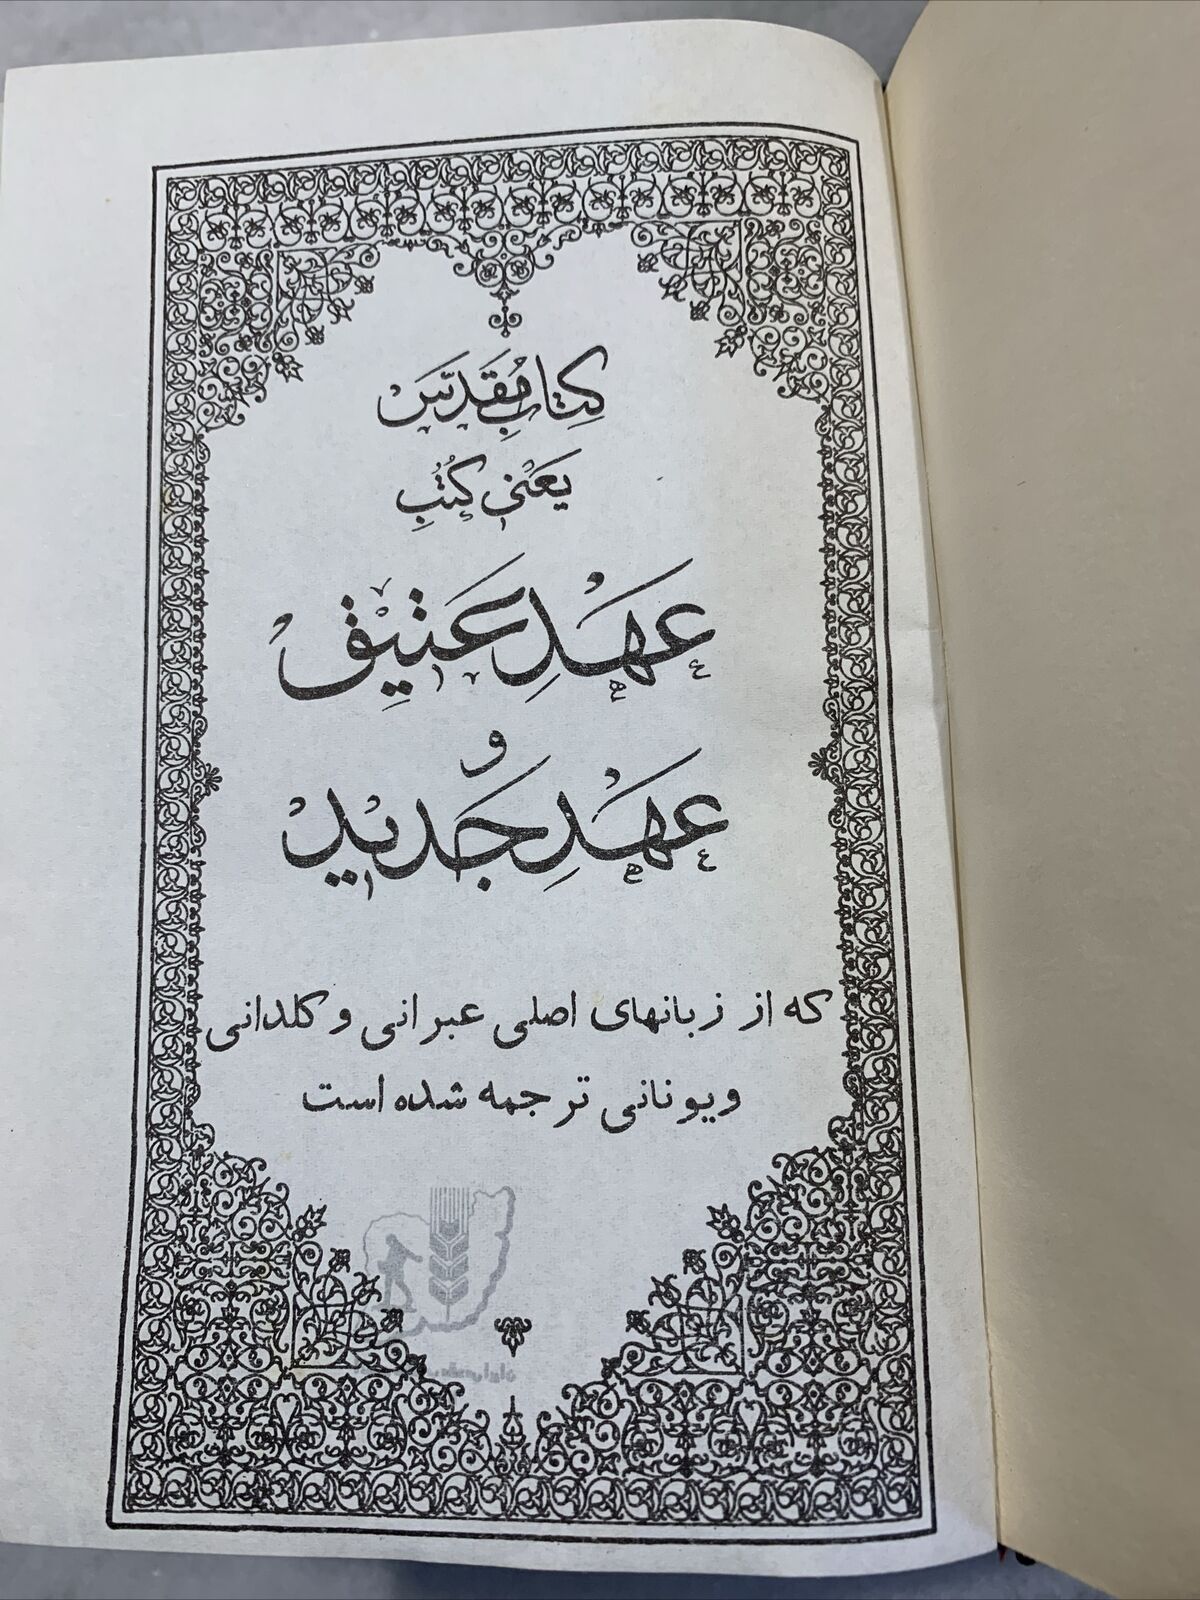 THE HOLY BOOK Translated From Original Hebrew & Chaldean To Persian Language